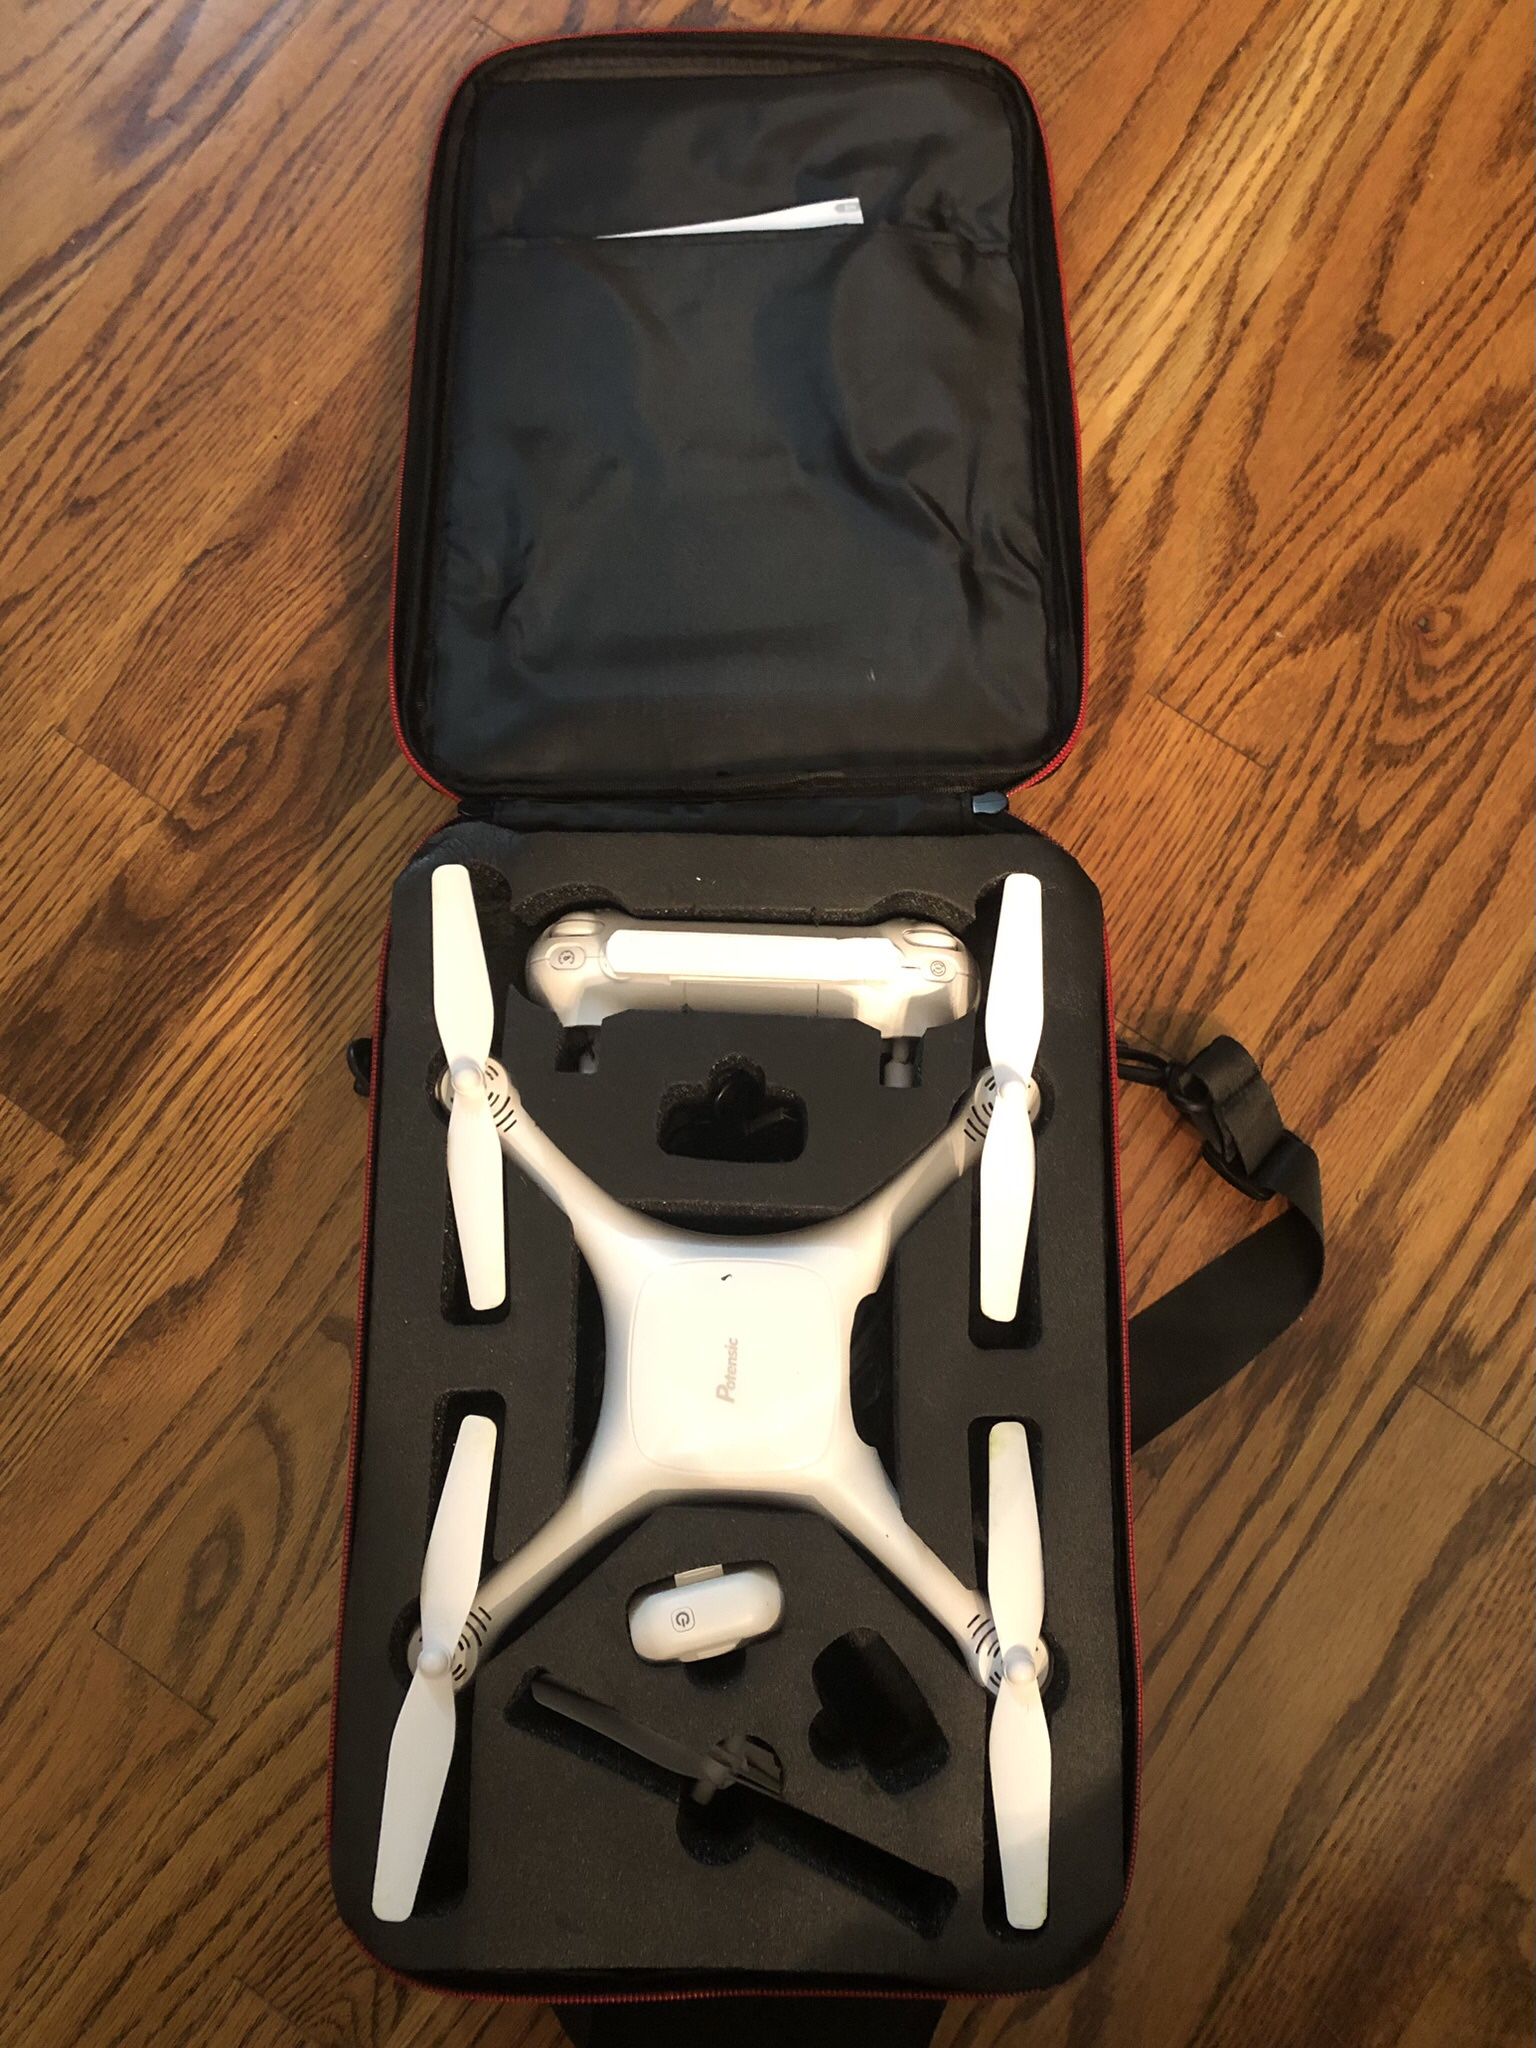 Potensic ATOM SE for Sale in Waterbury, CT - OfferUp